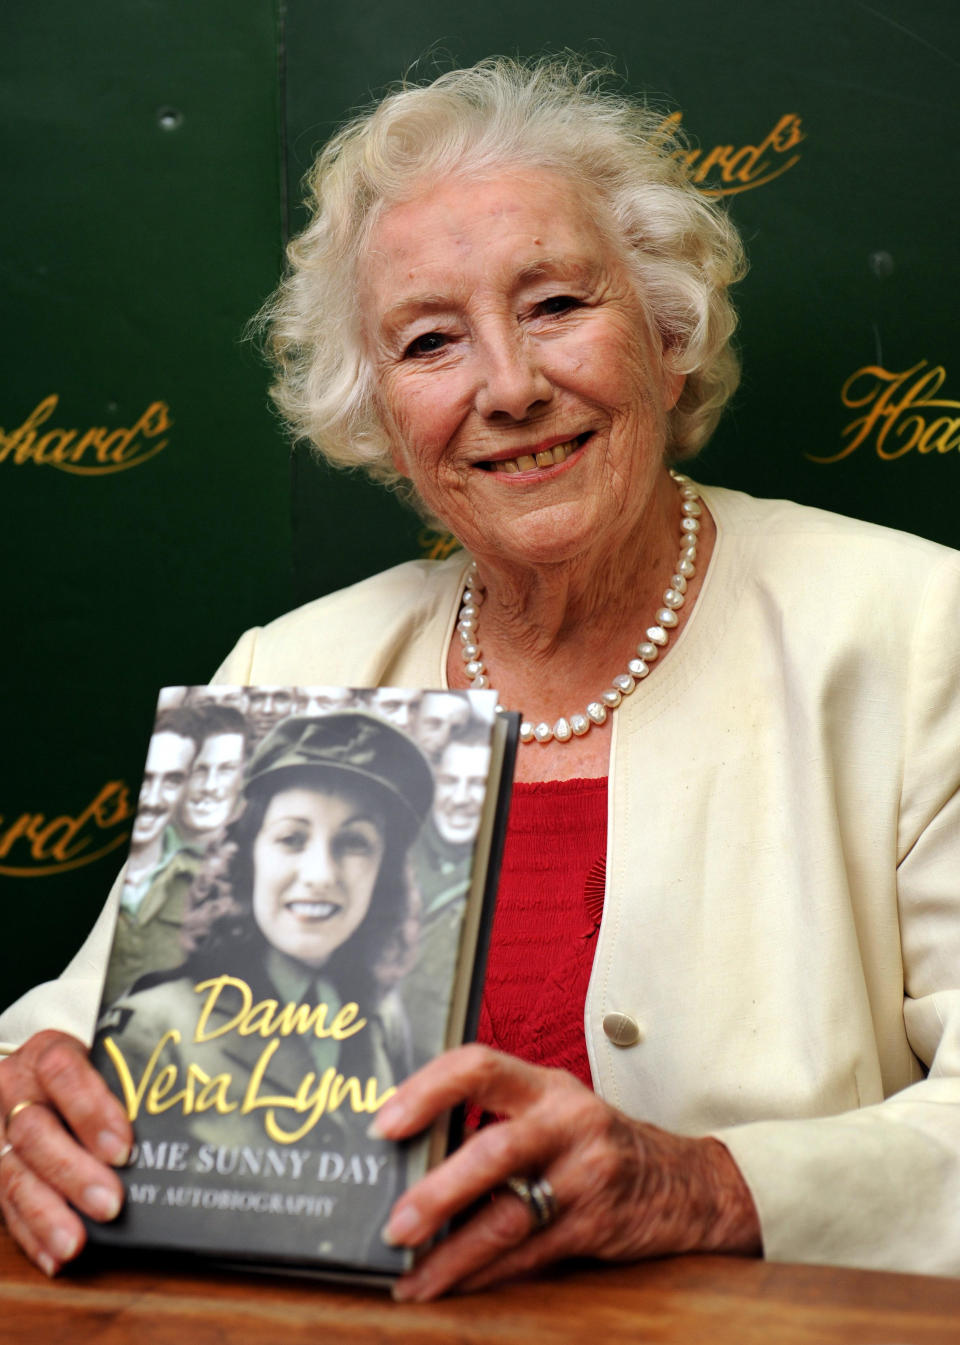 Dame Vera Lynn pictured with her autobiography 'Some Sunny Day'.